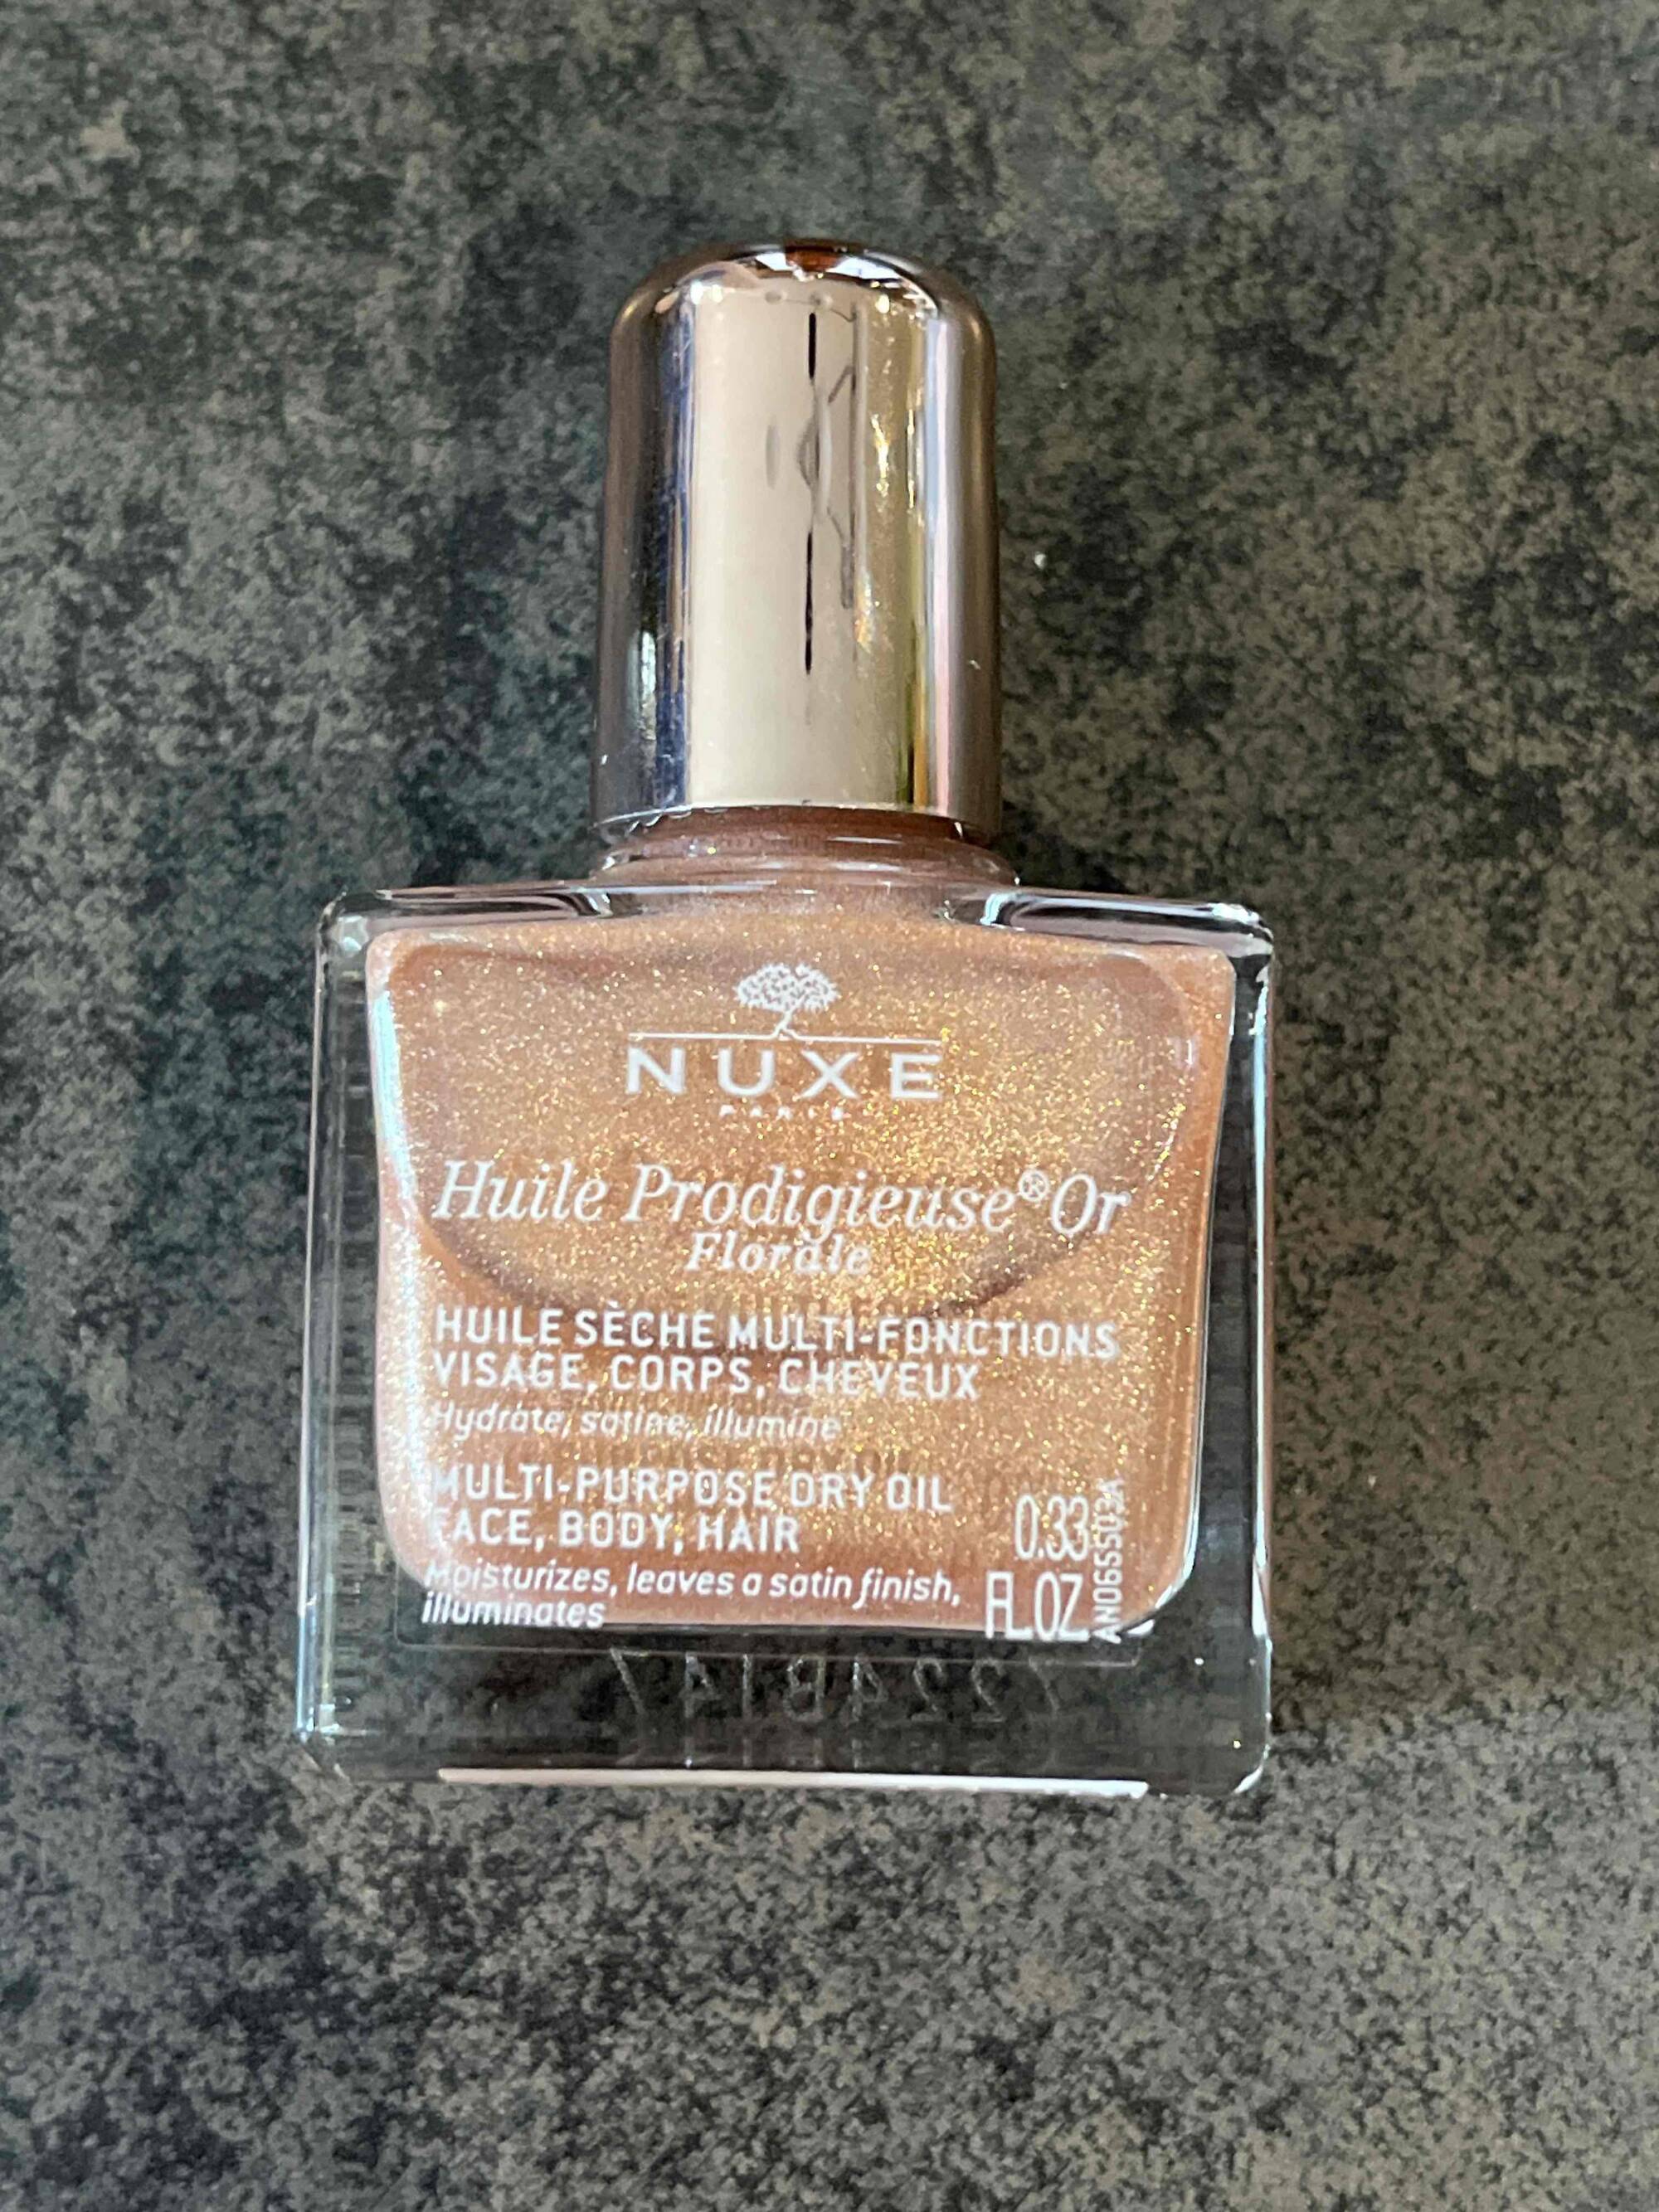 NUXE - Huile prodigieuse or florale